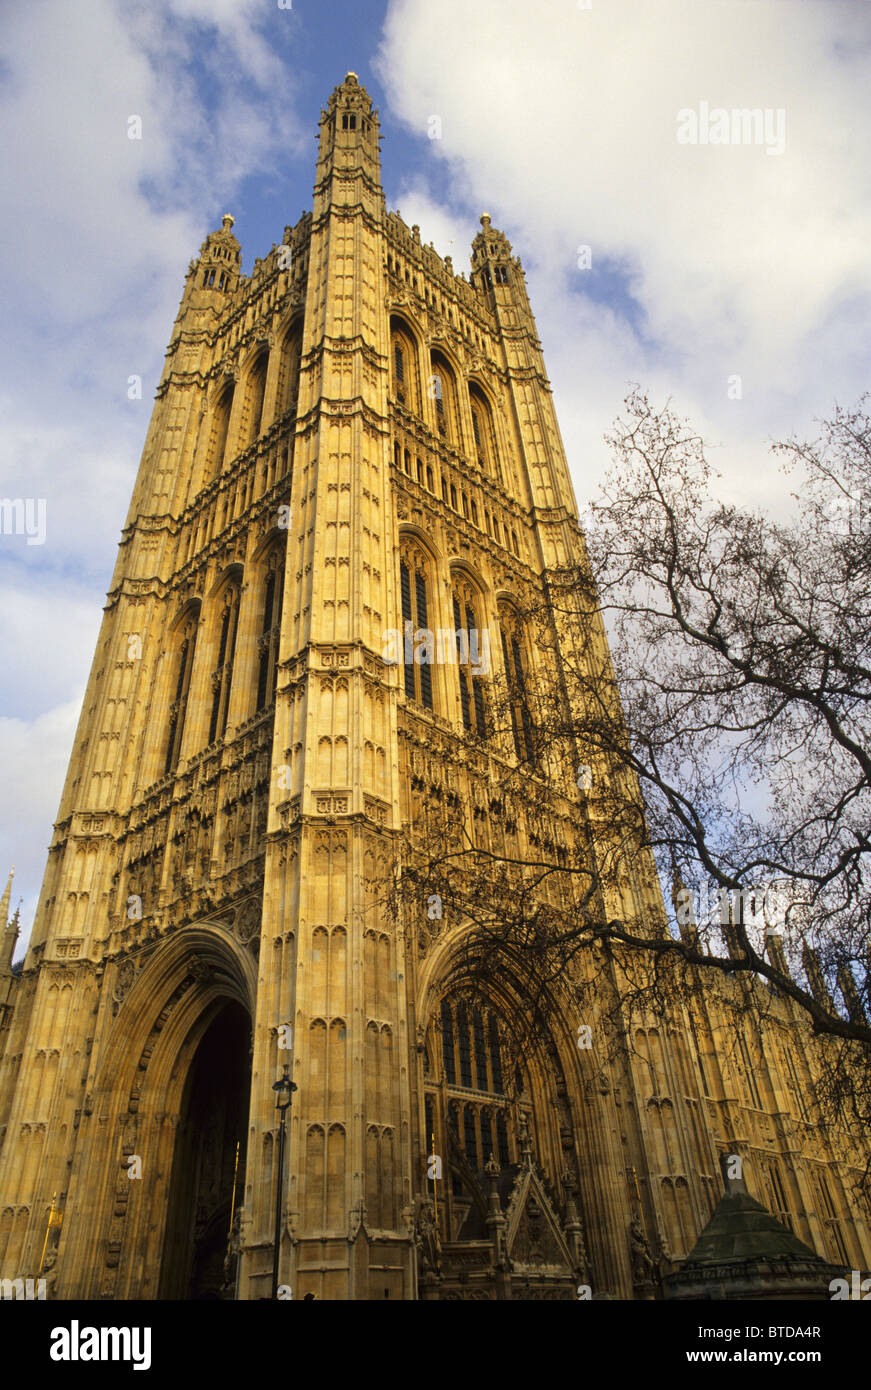 Victoria Tower, part of the Houses of Parliament, Westminster, London, England. Stock Photo